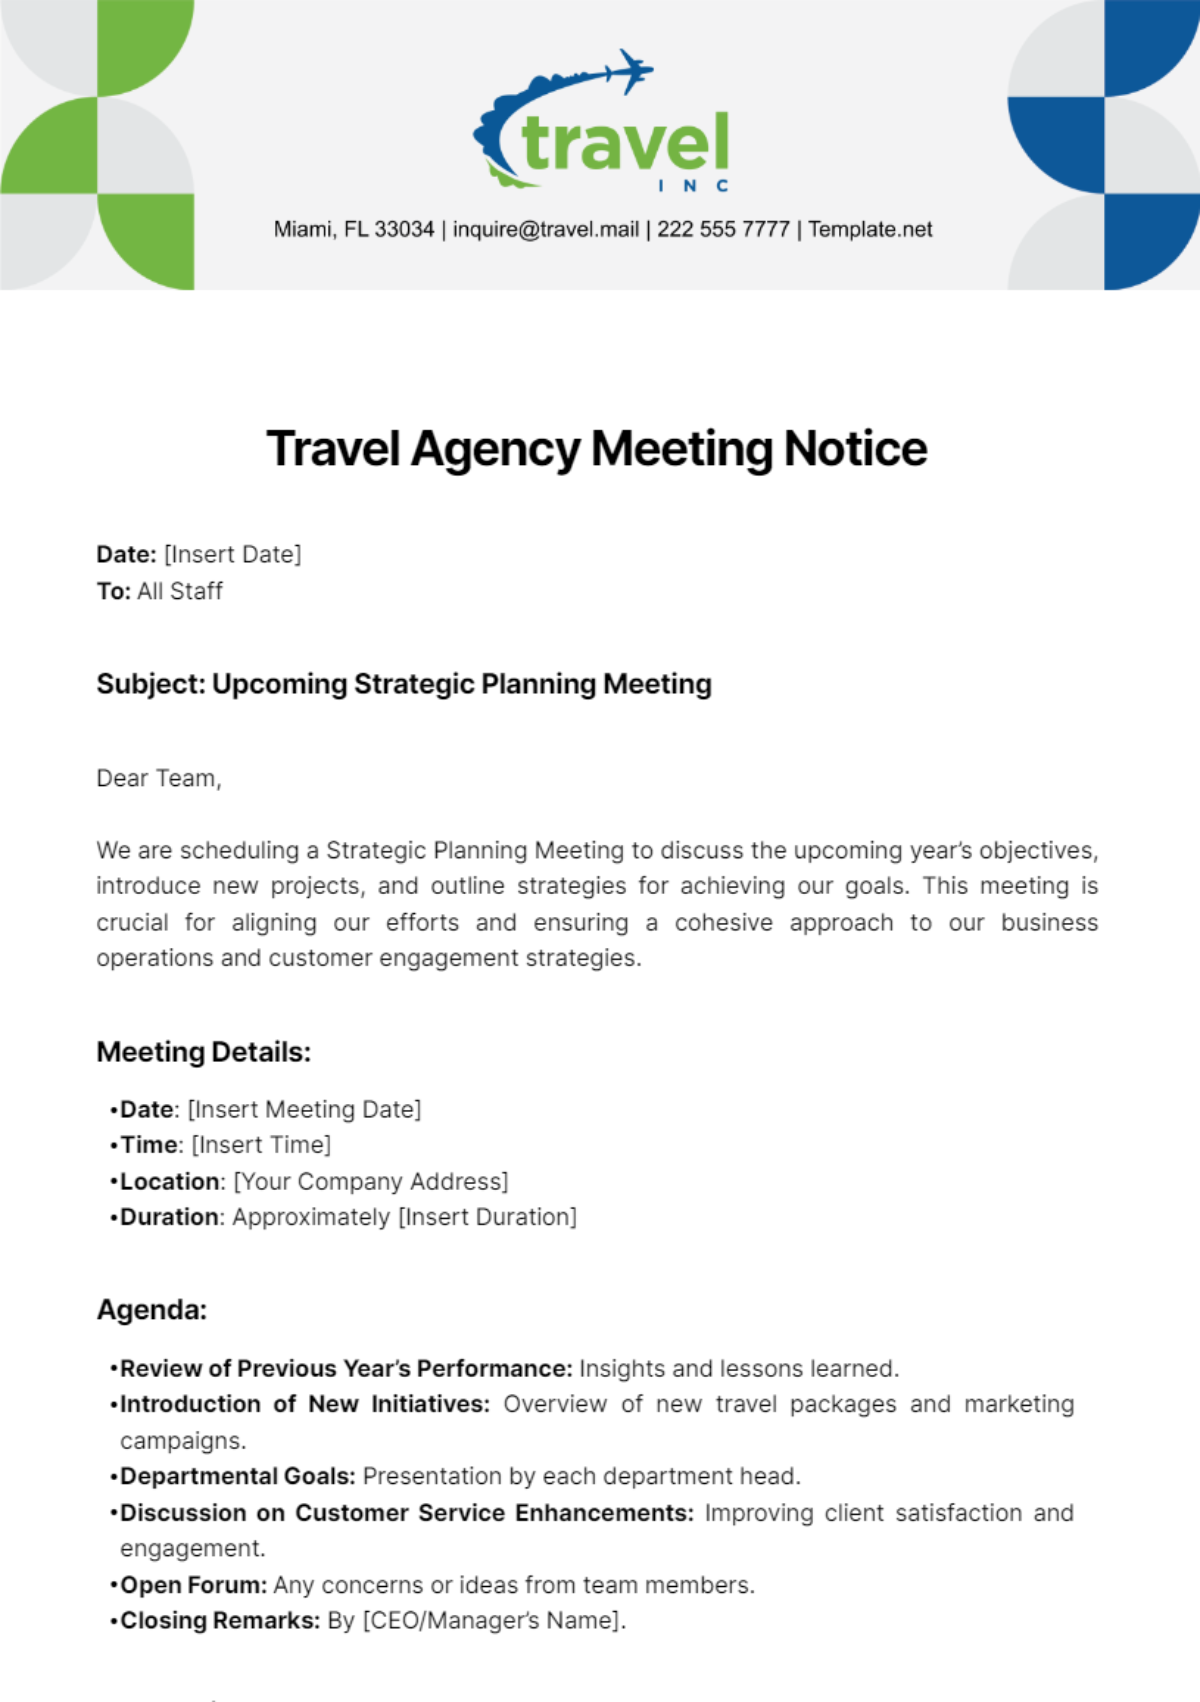 Free Travel Agency Meeting Notice Template